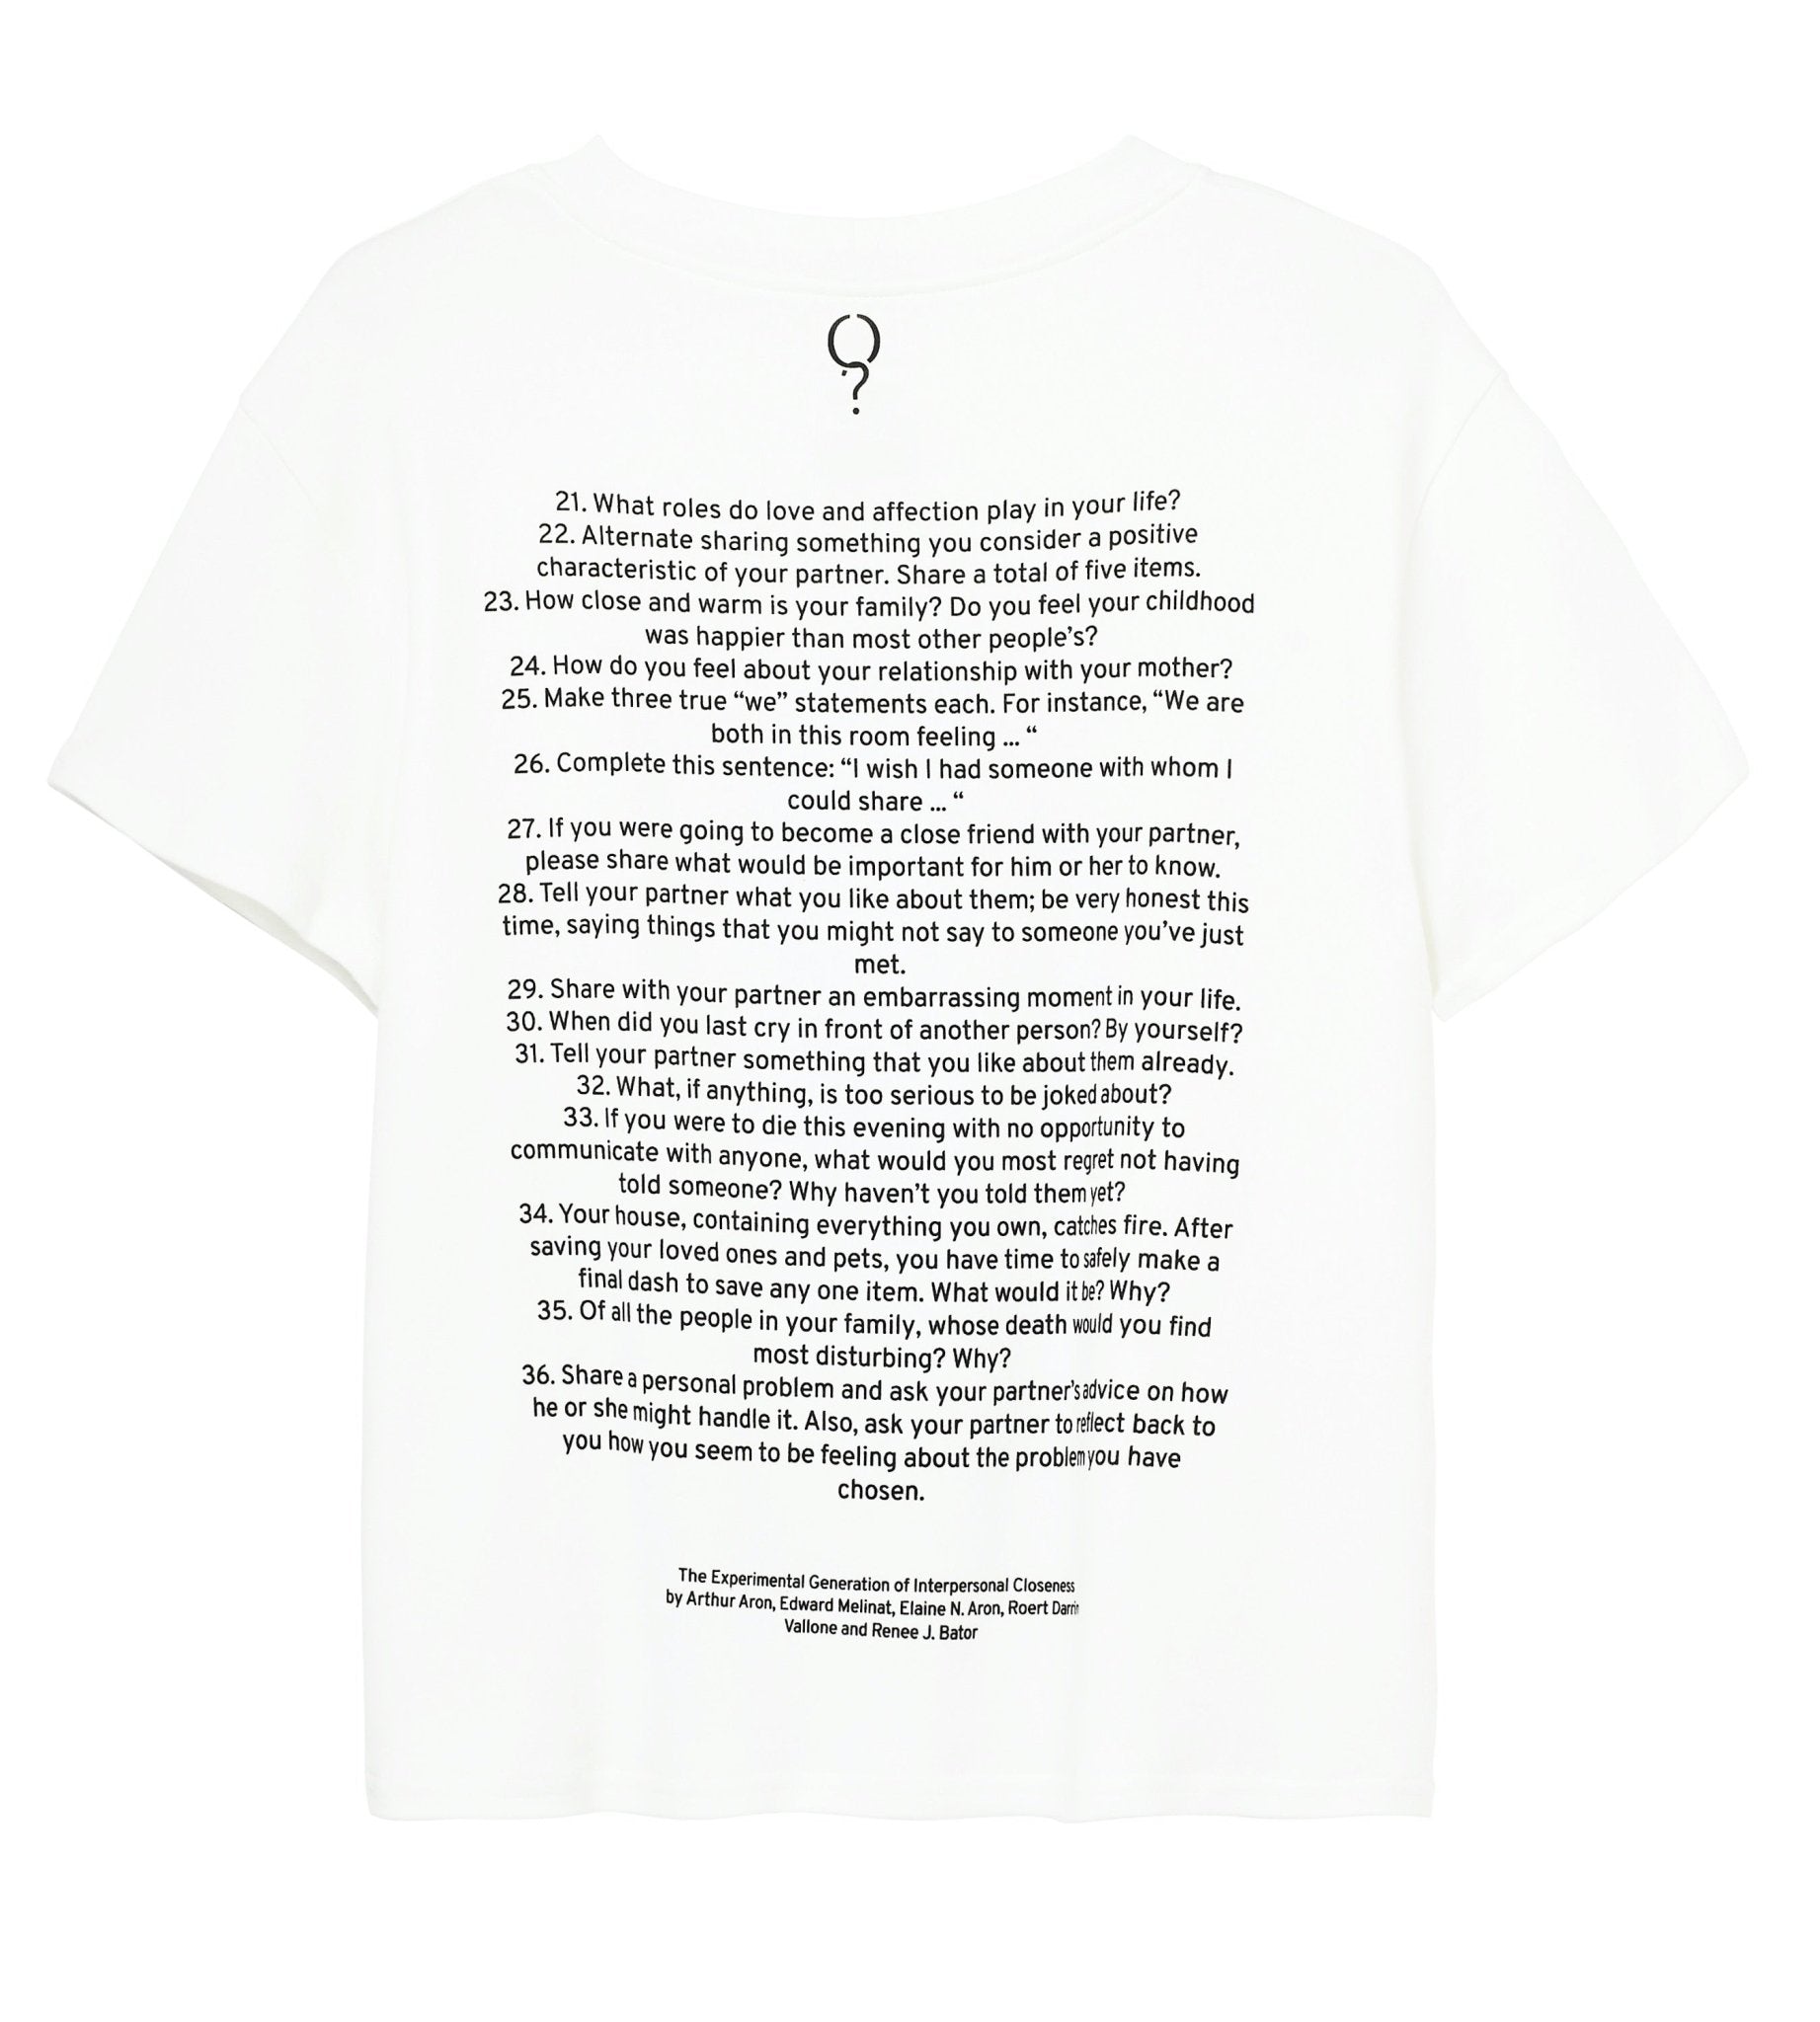 36 Questions for Closeness Boxy T-Shirt - OBLIVIOUS?